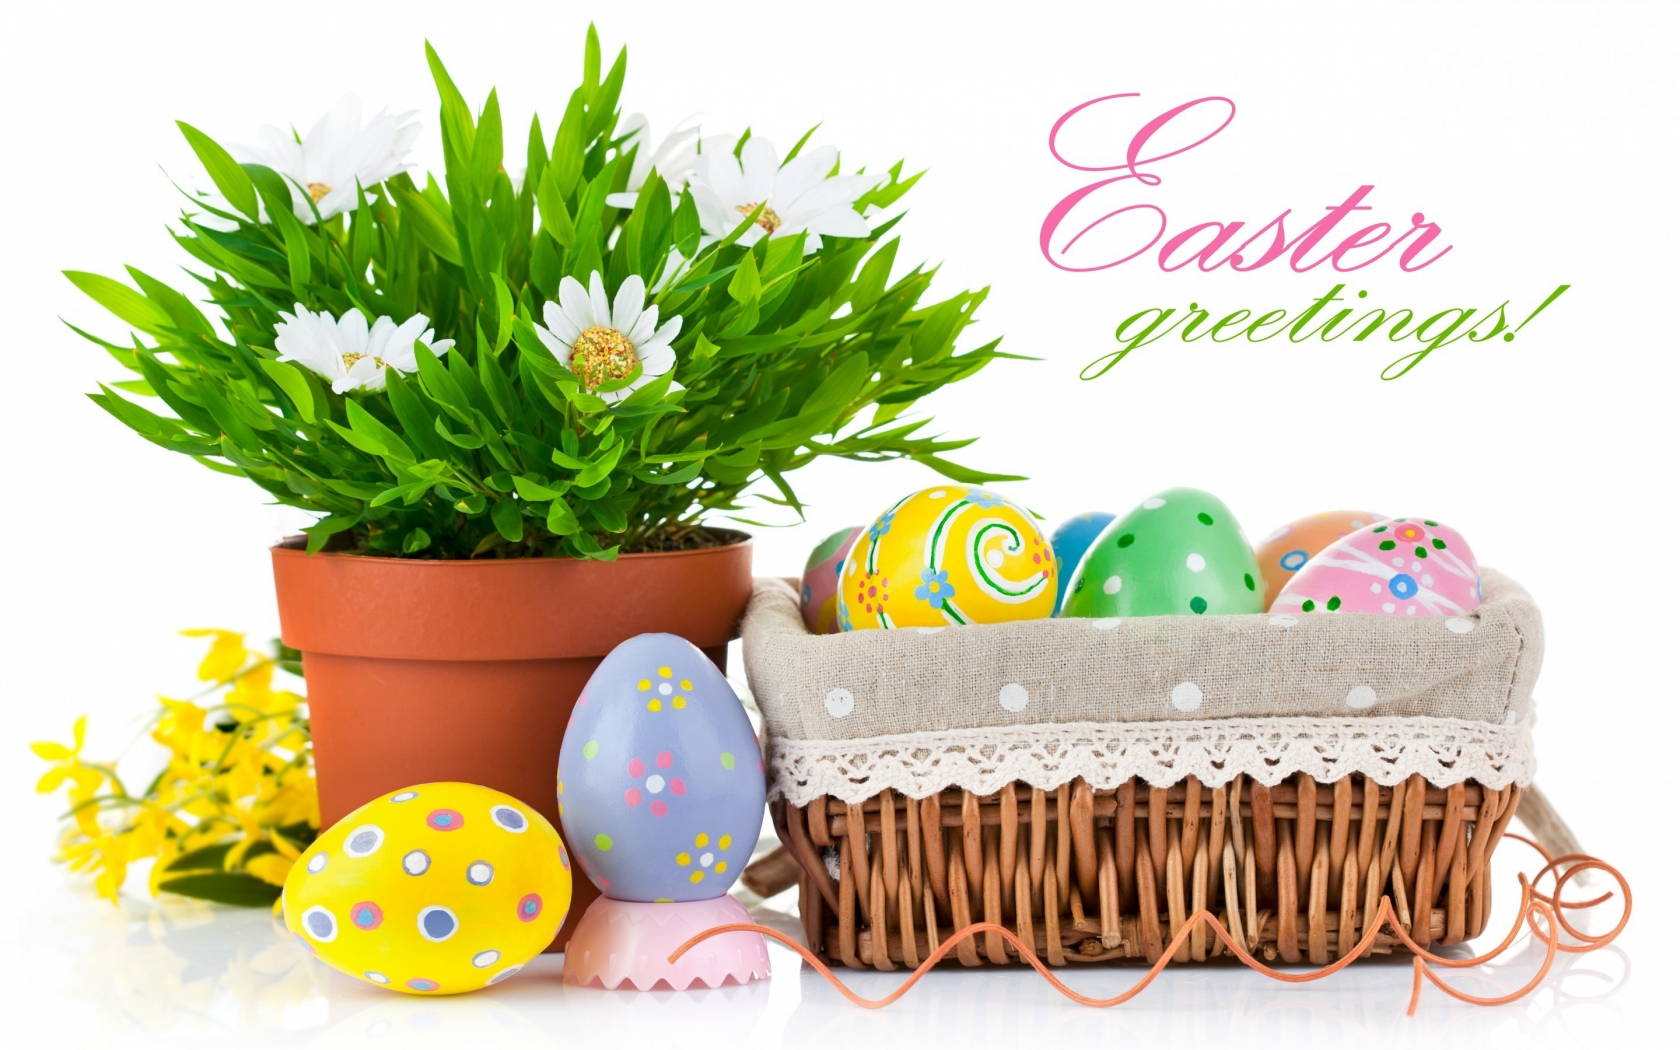 Easter Greetings for 1680 x 1050 widescreen resolution